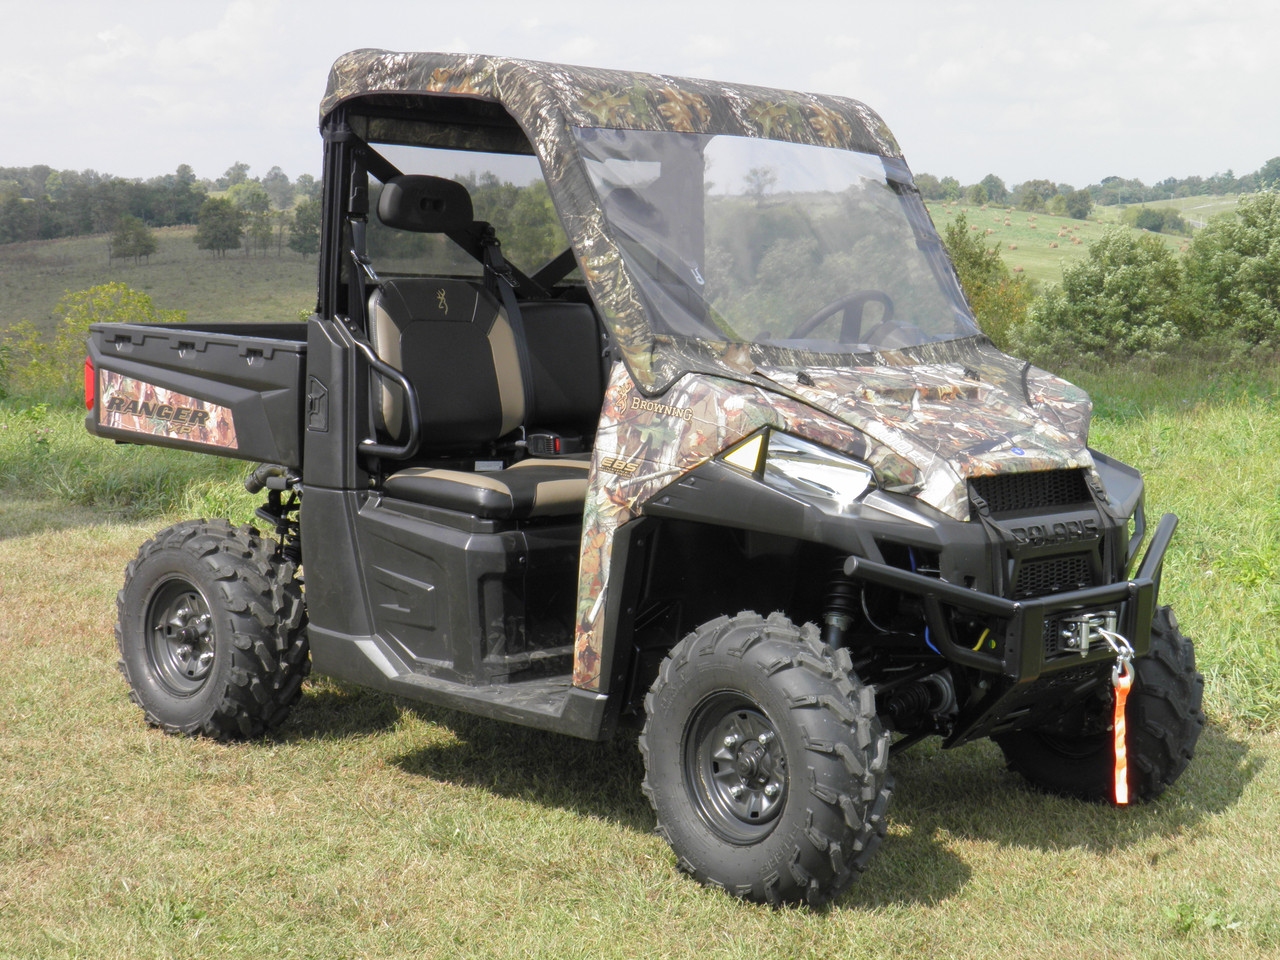 3 Star side x side Polaris Ranger XP570 XP900 XP1000 1000 vinyl windshield, roof and rear window front and side angle view